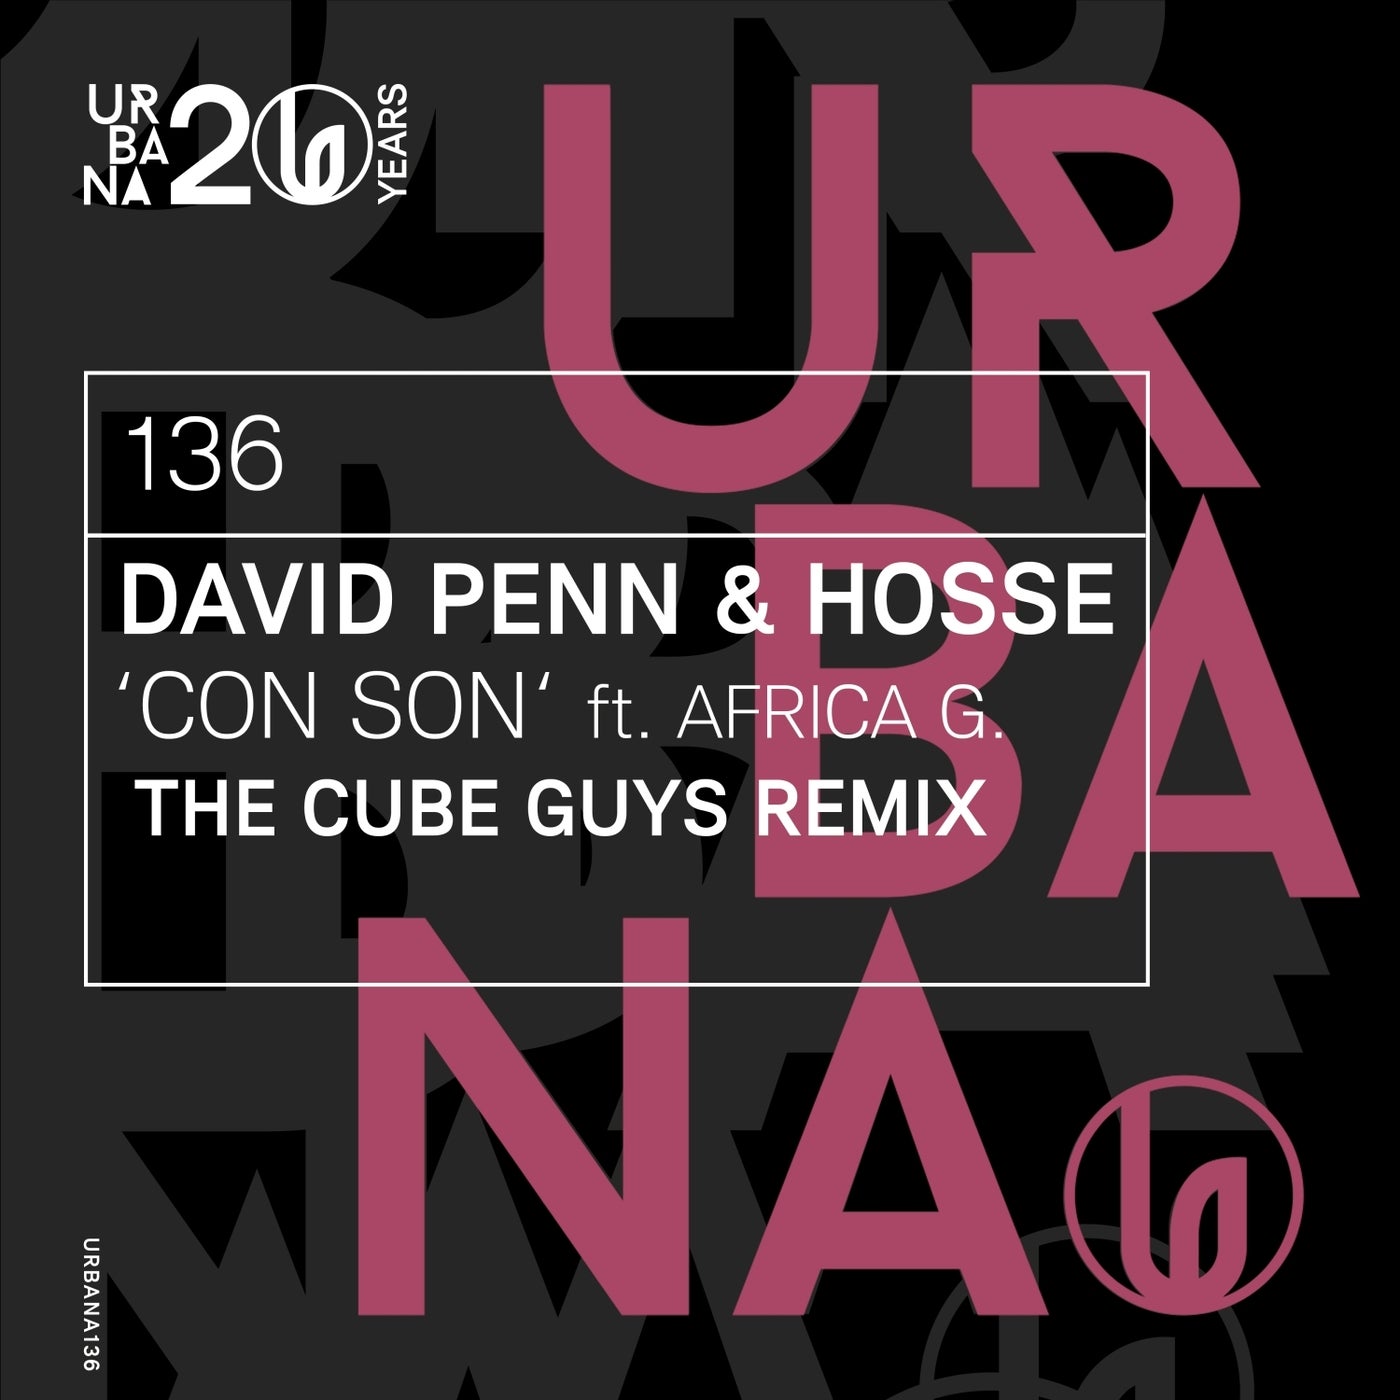 Release Cover: Con Son (ft. Afric G.) (THE CUBE GUYS REMIX) Download Free on Electrobuzz